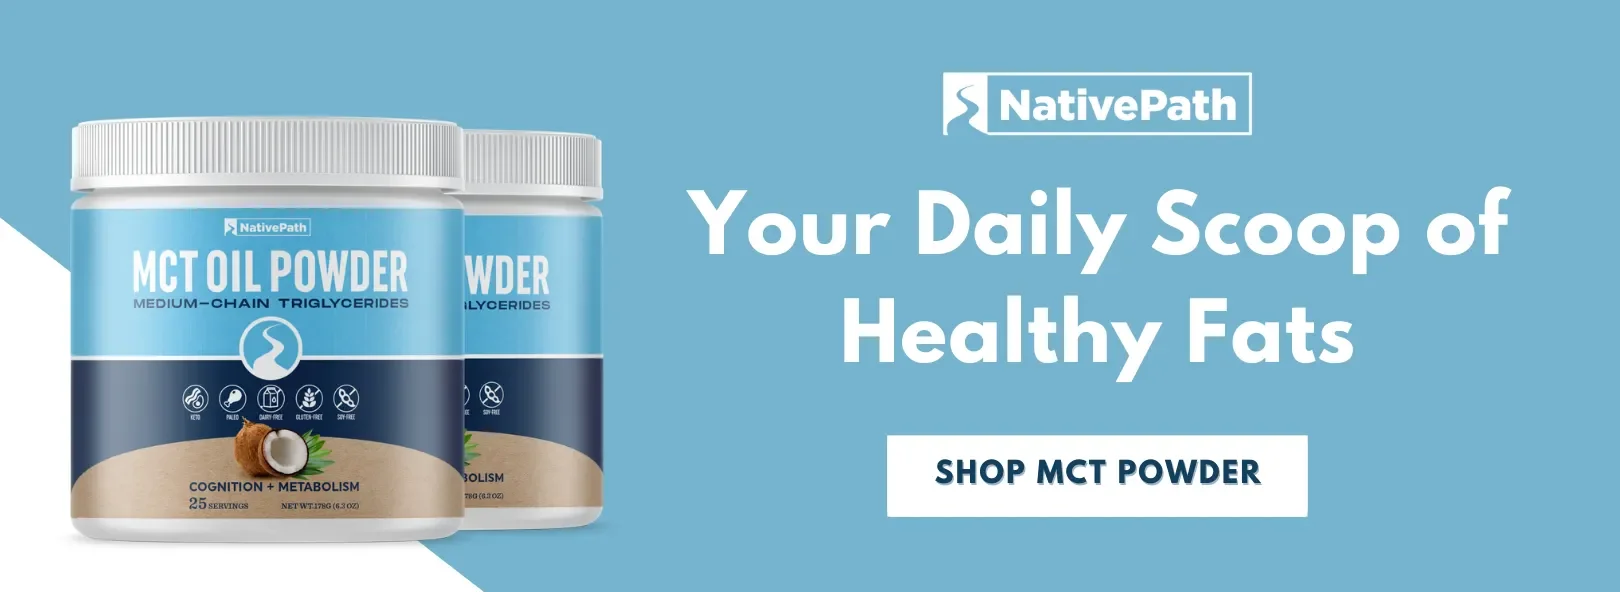 Your Daily Scoop of Healthy Fats: Shop NativePath MCT Powder